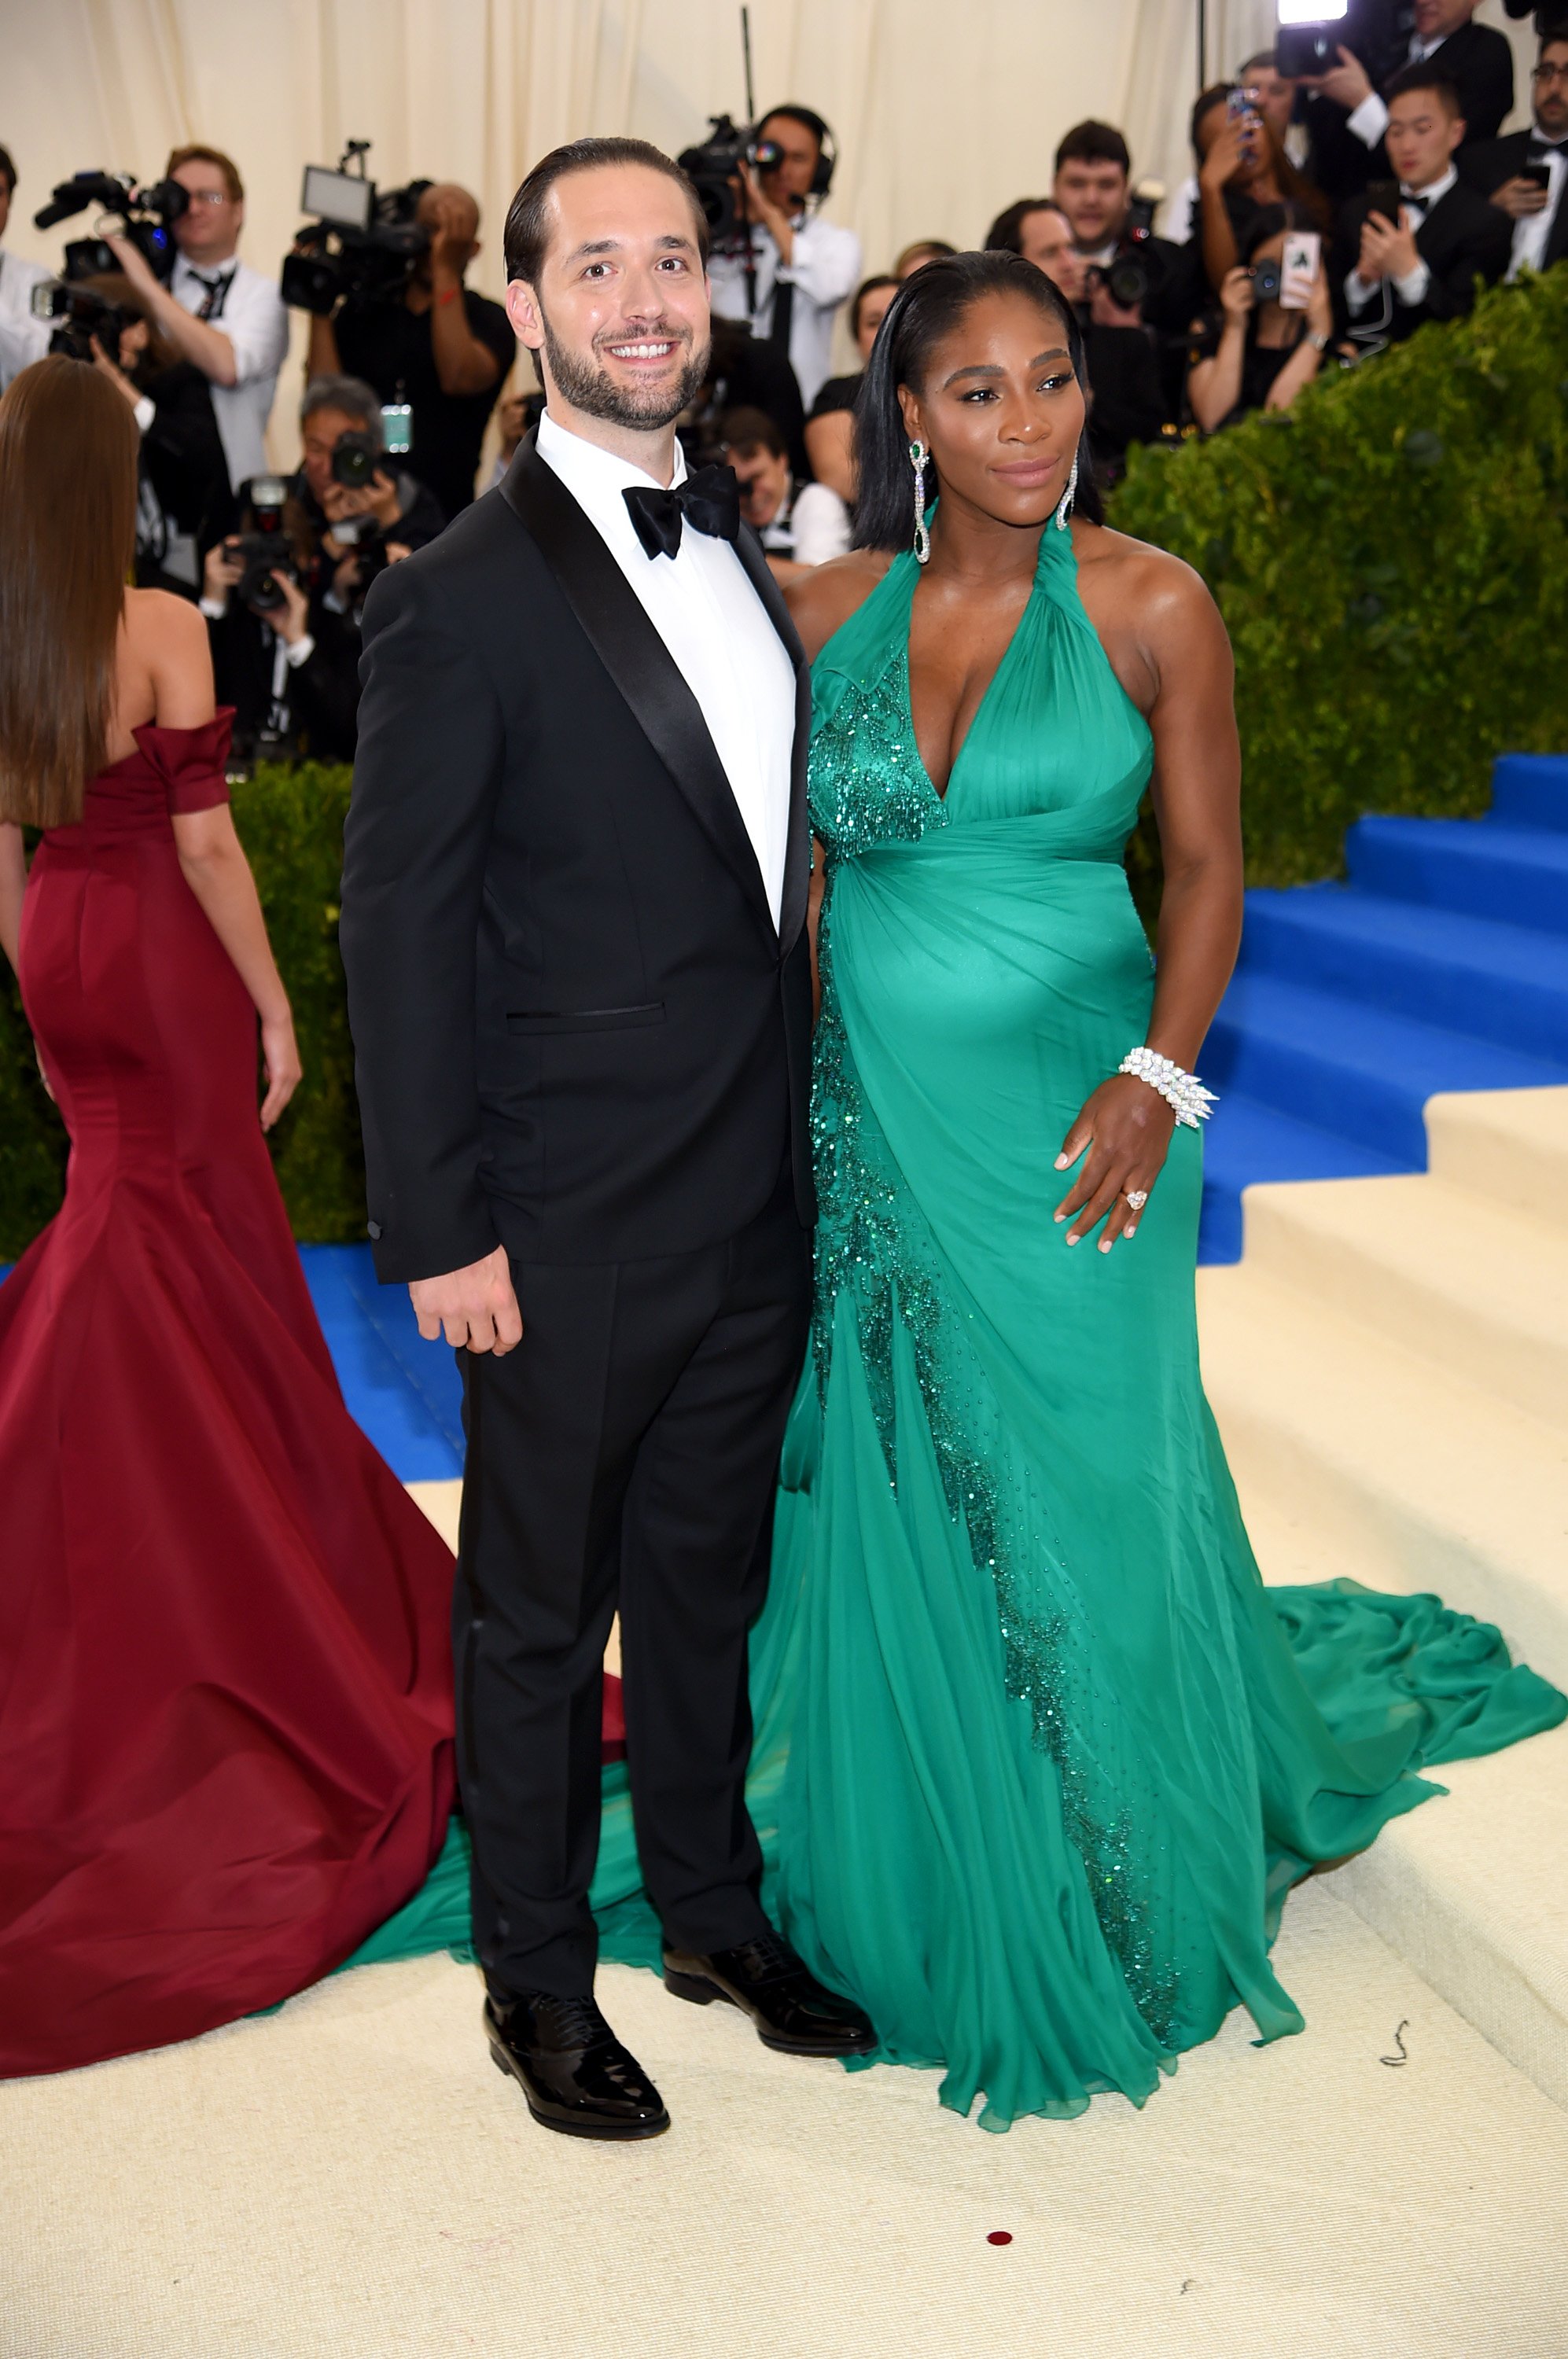 Alexis Ohanian and Serena Williams pictured at  the "Rei Kawakubo/Comme des Garcons: Art of the In-Between" Costume Institute Gala at the Metropolitan Museum of Art, 2017. | Photo: Getty Images